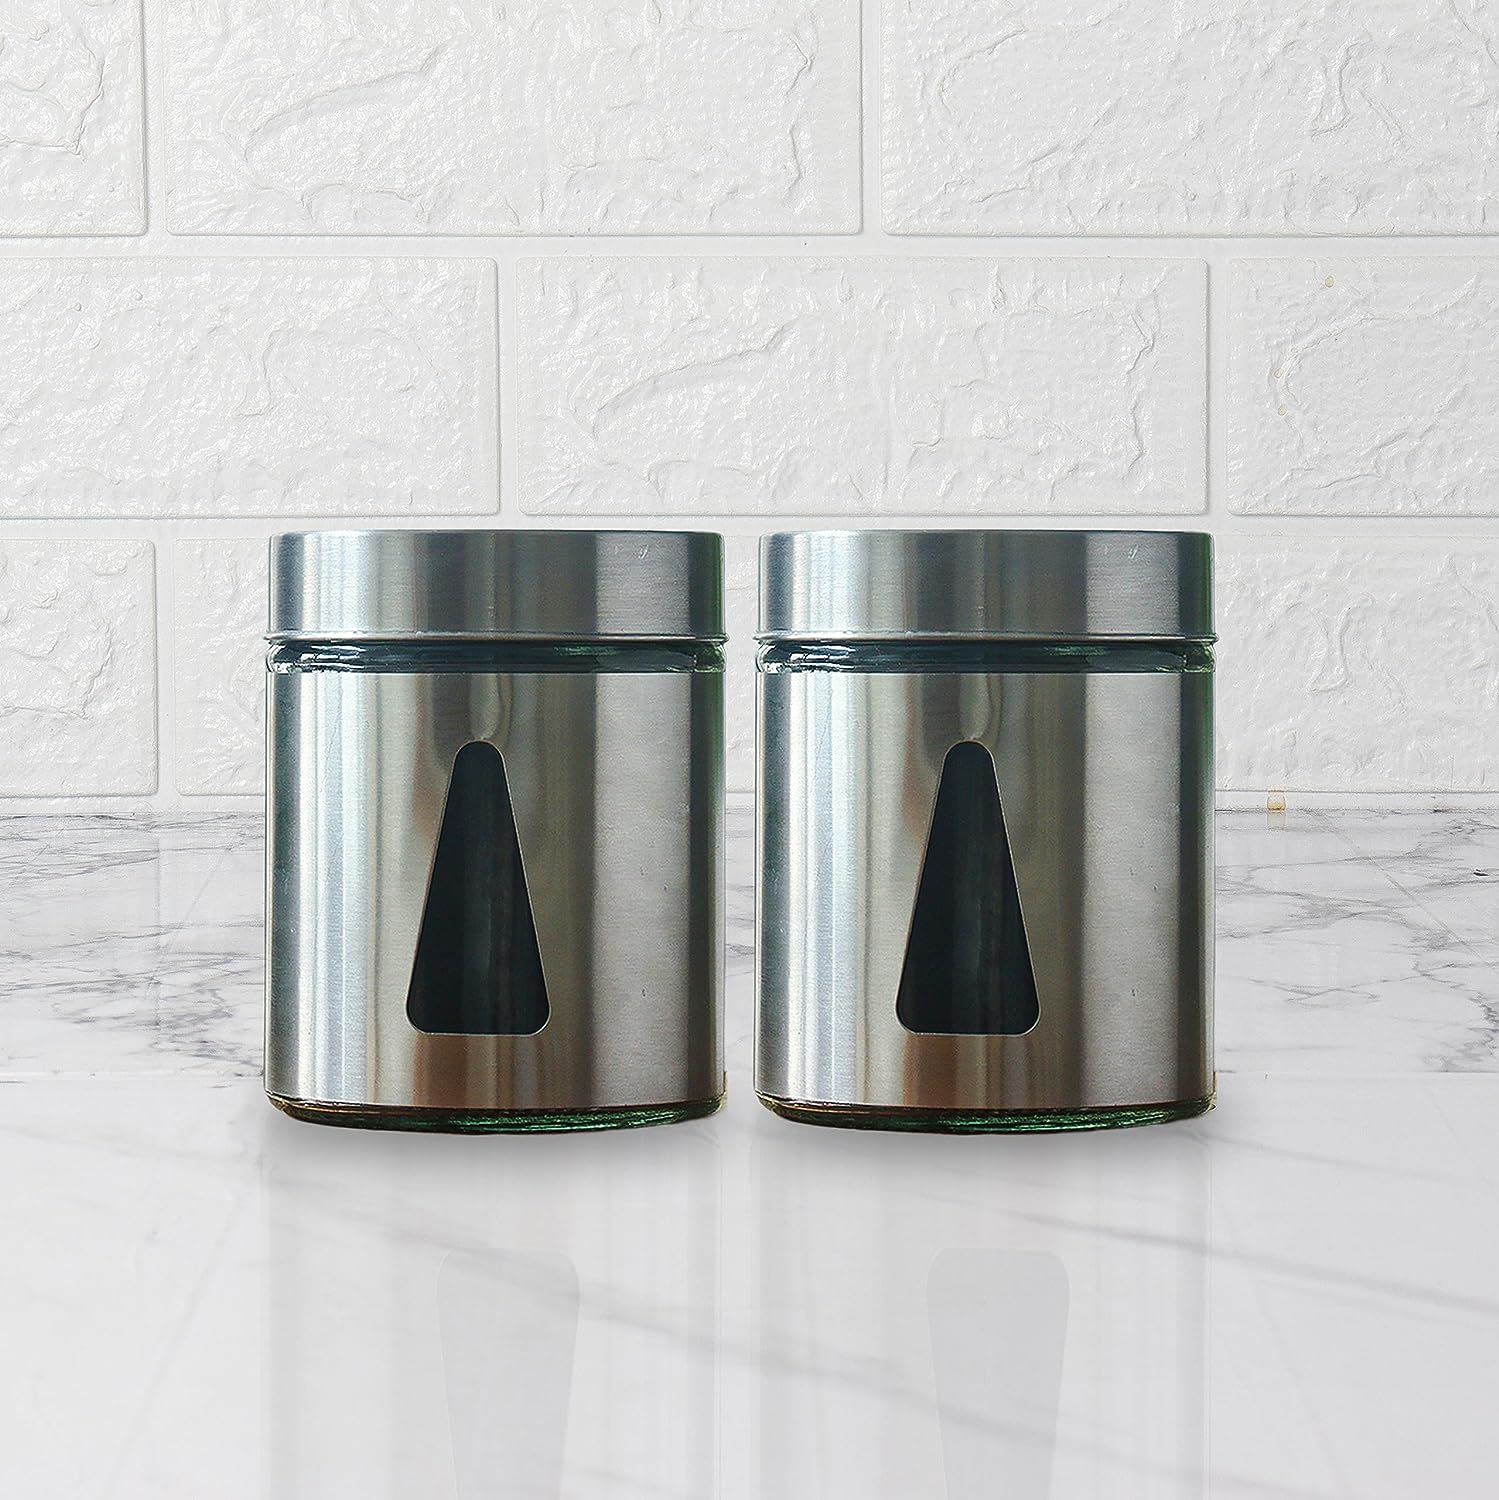 Femora Steel Jar for Kitchen Storage with Triangle Glass Window and Stainless Steel Cover, 700 ml, Set Of 2, Free Replacement of Lids